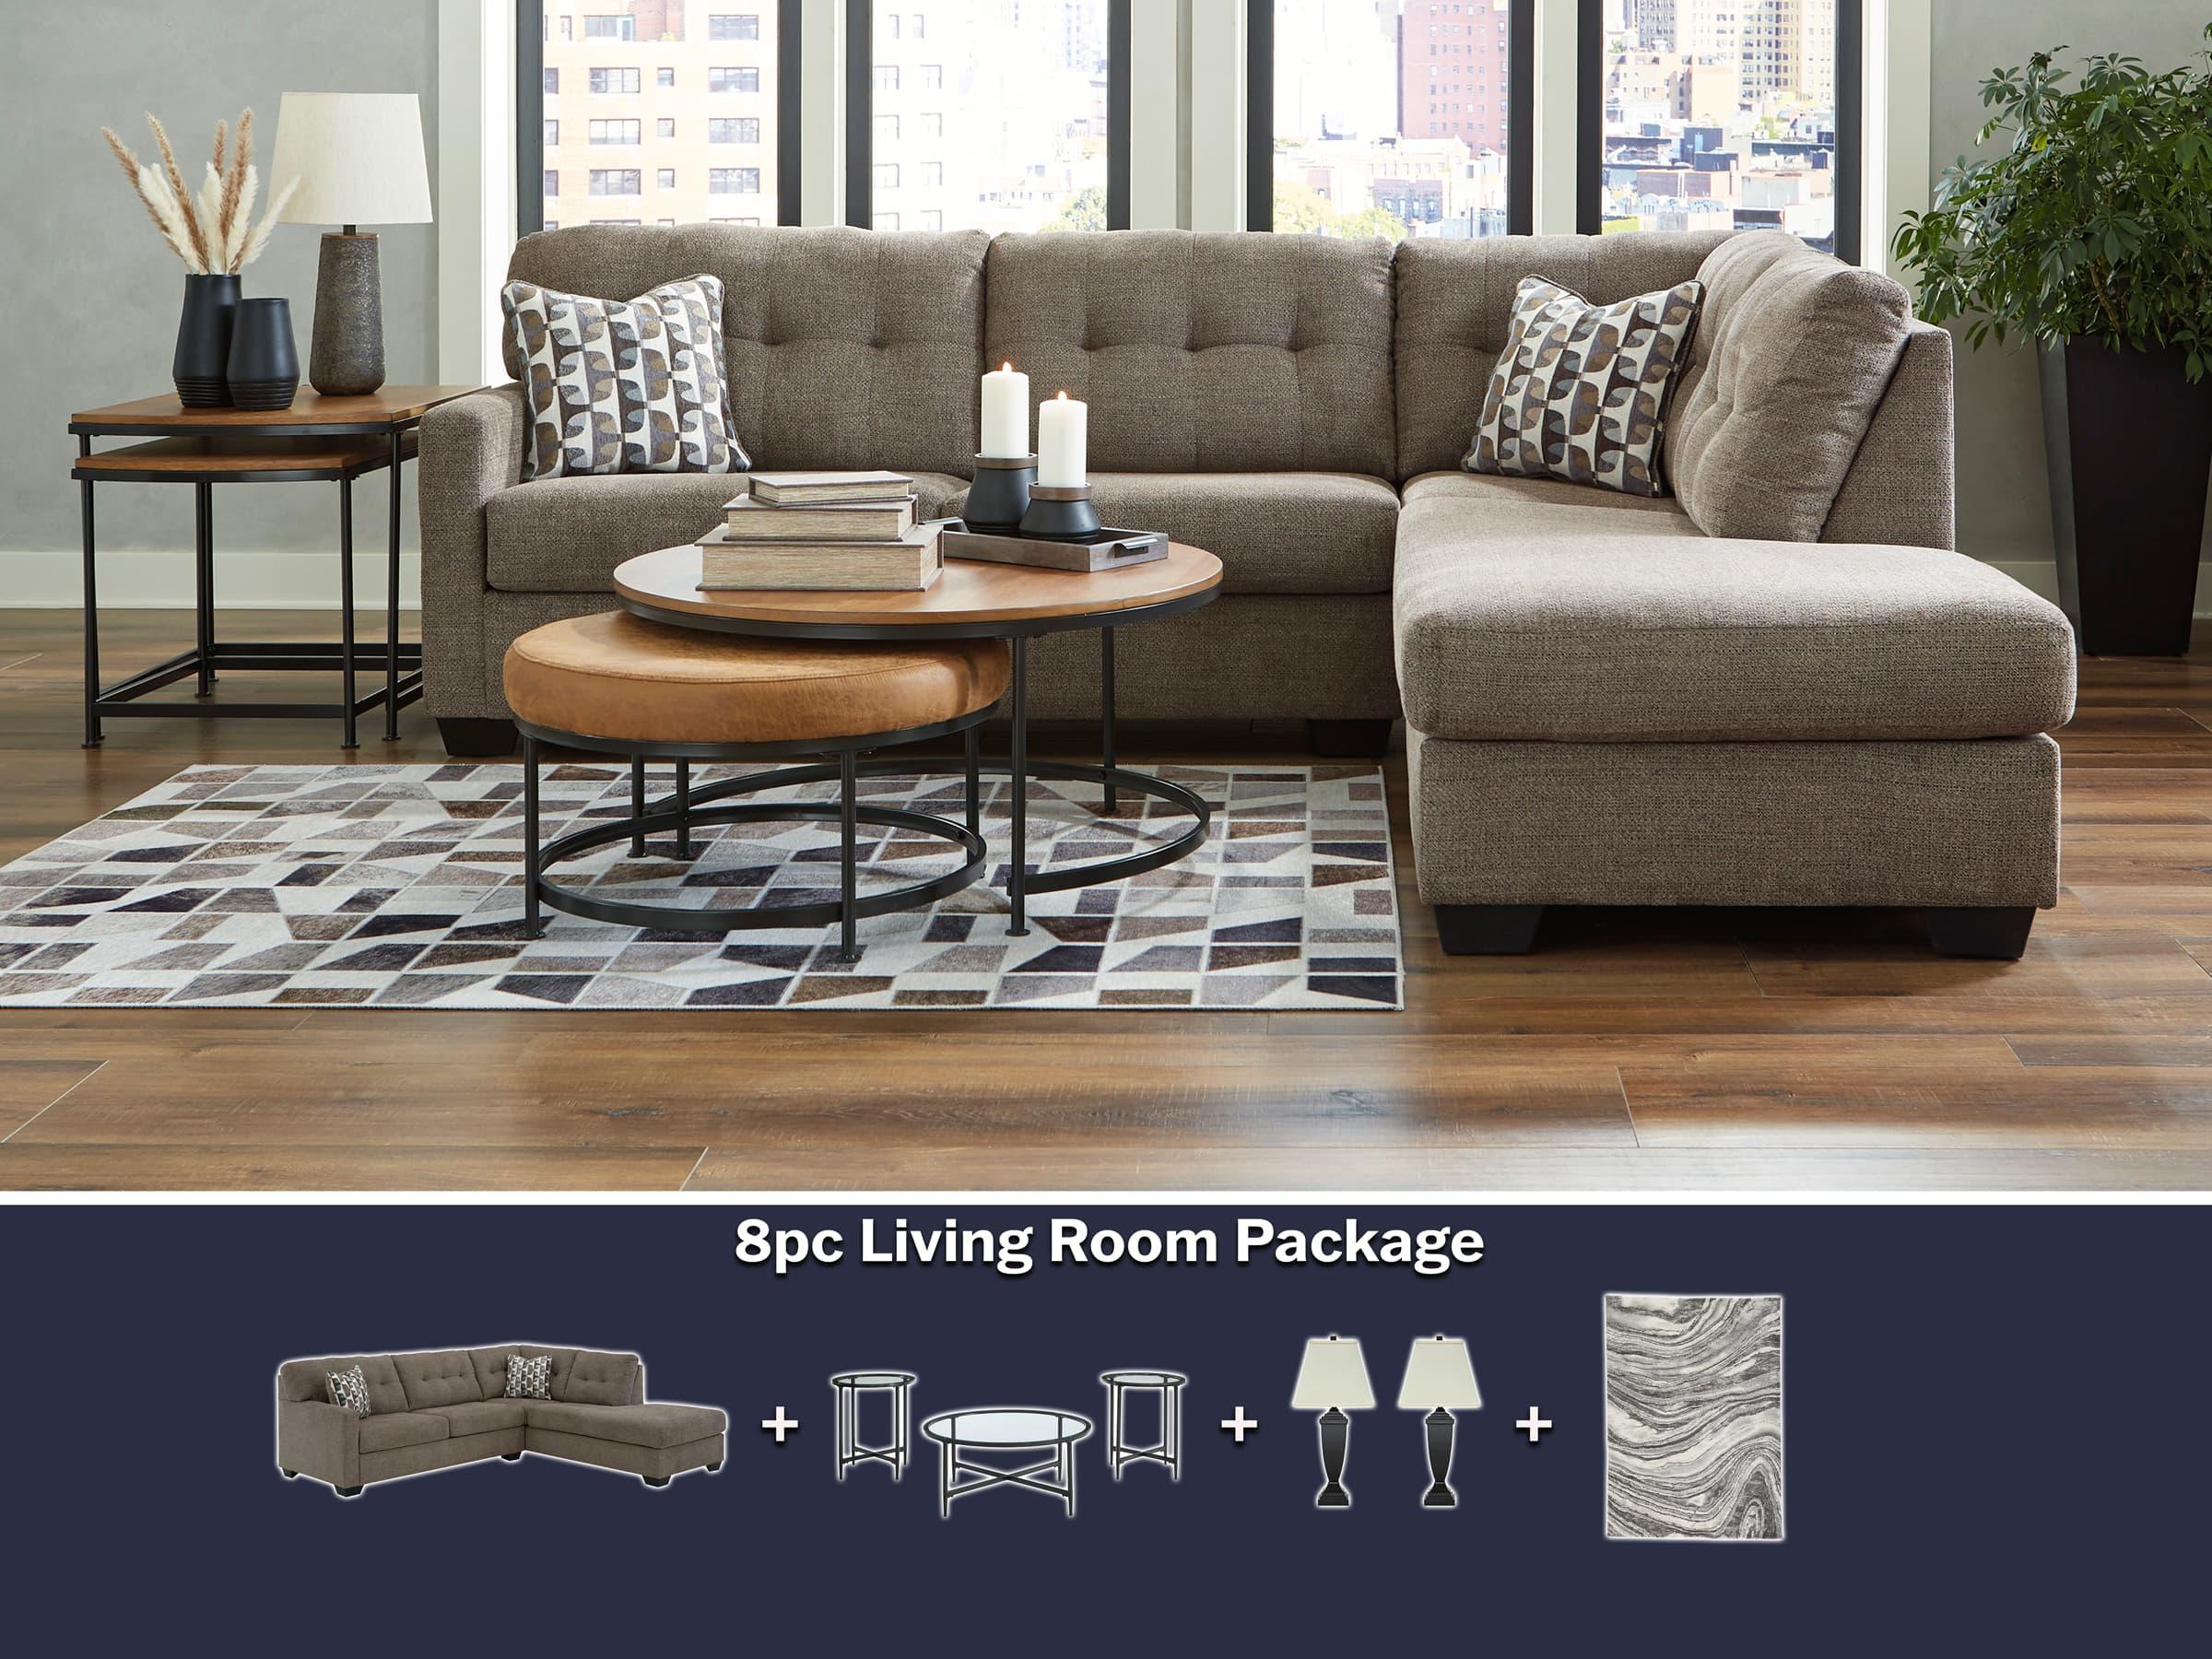 5th Avenue Furniture - Mahoney Sectional 8pc Package Deal - 5th Avenue Furniture